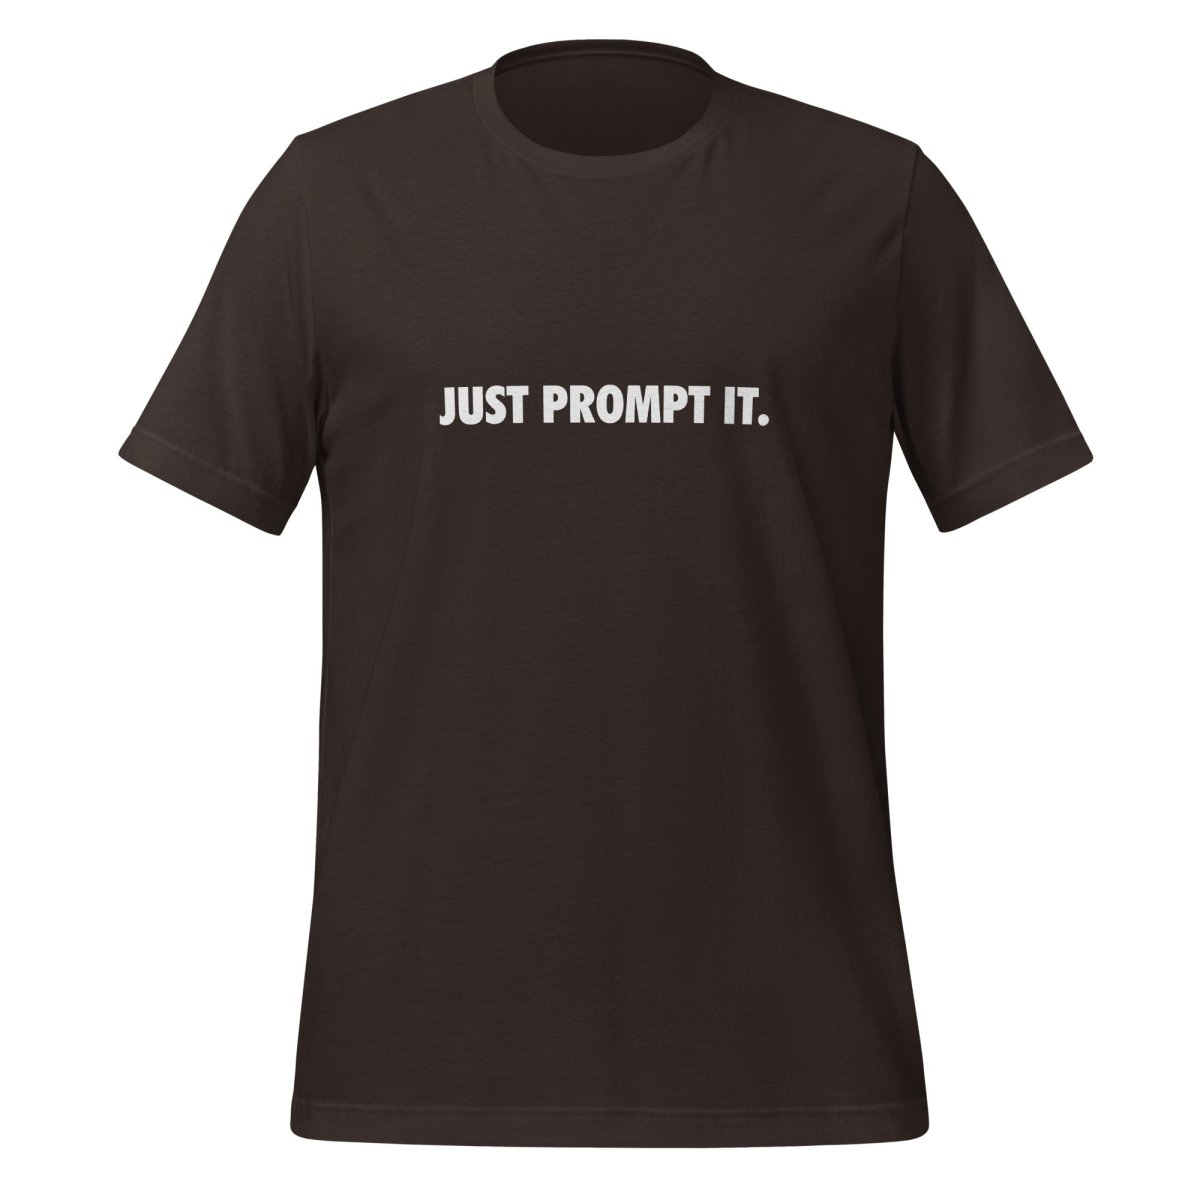 JUST PROMPT IT. T - Shirt (unisex) - Brown - AI Store